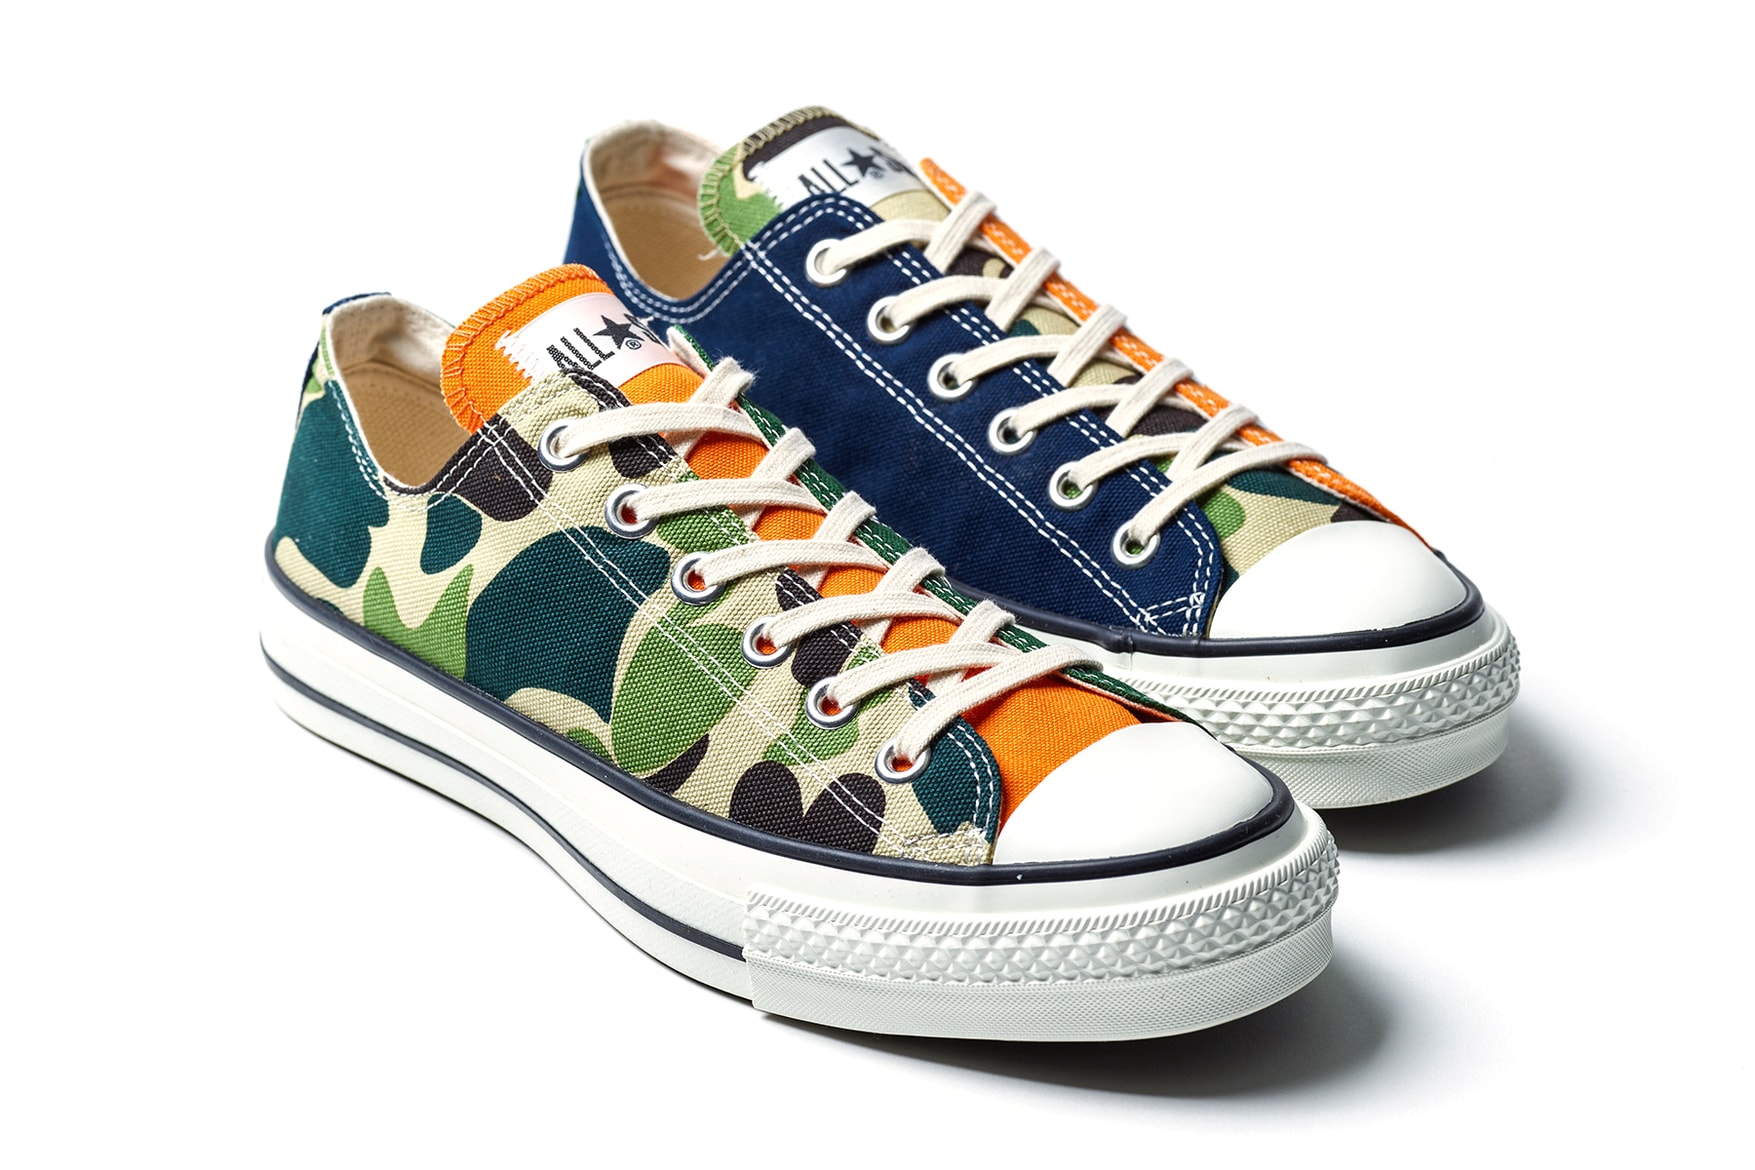 Converse x BILLY'S ENT All Star J Details Cop Purchase Buy Available New Shoes Trainers Kicks Sneakers Green Blue Orange White